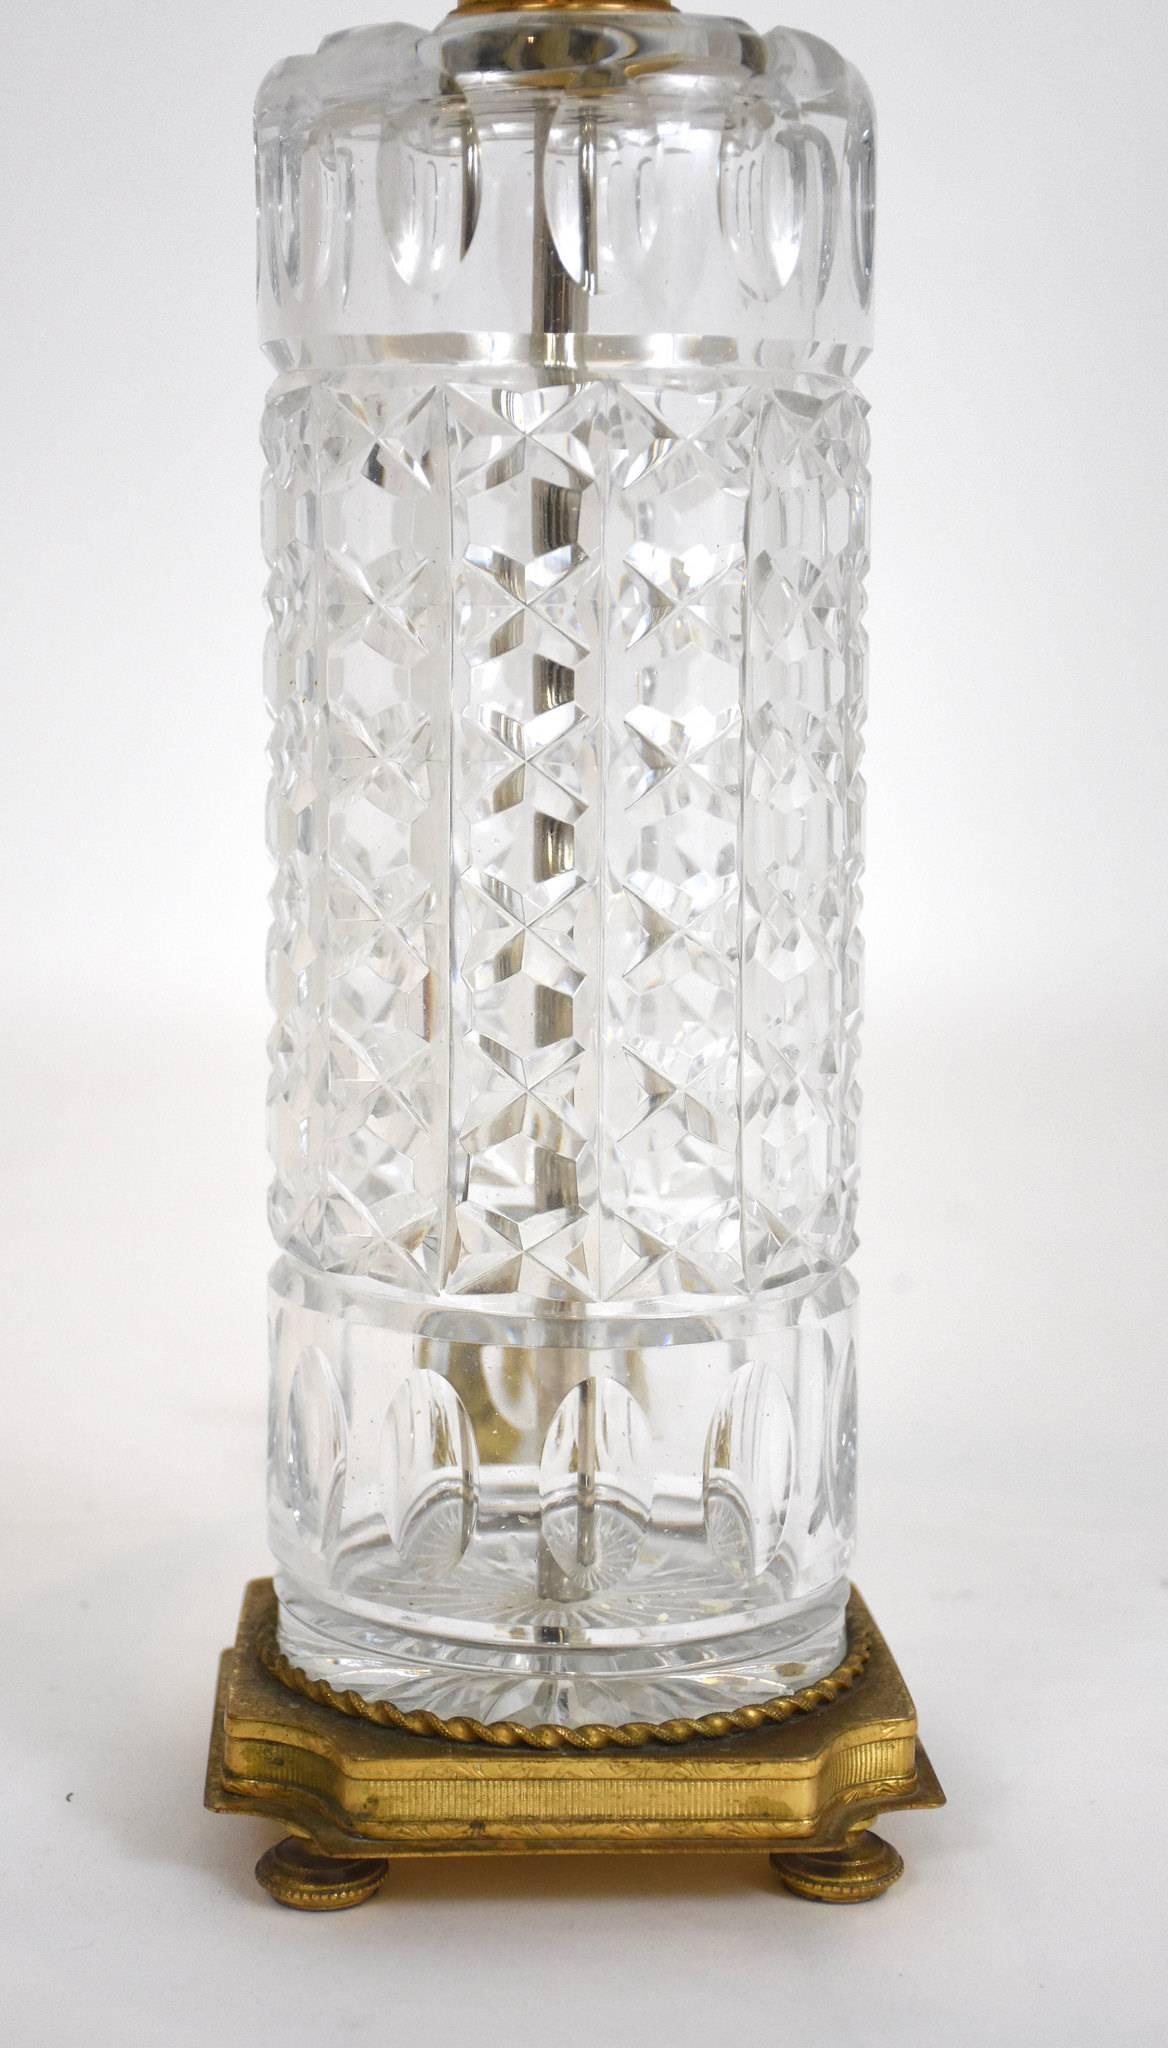 An early 20th century continental cut crystal and bronze doré table lamp with linen shade.

Dimensions:
24” H to top of finial
Shade is 9” H x 12